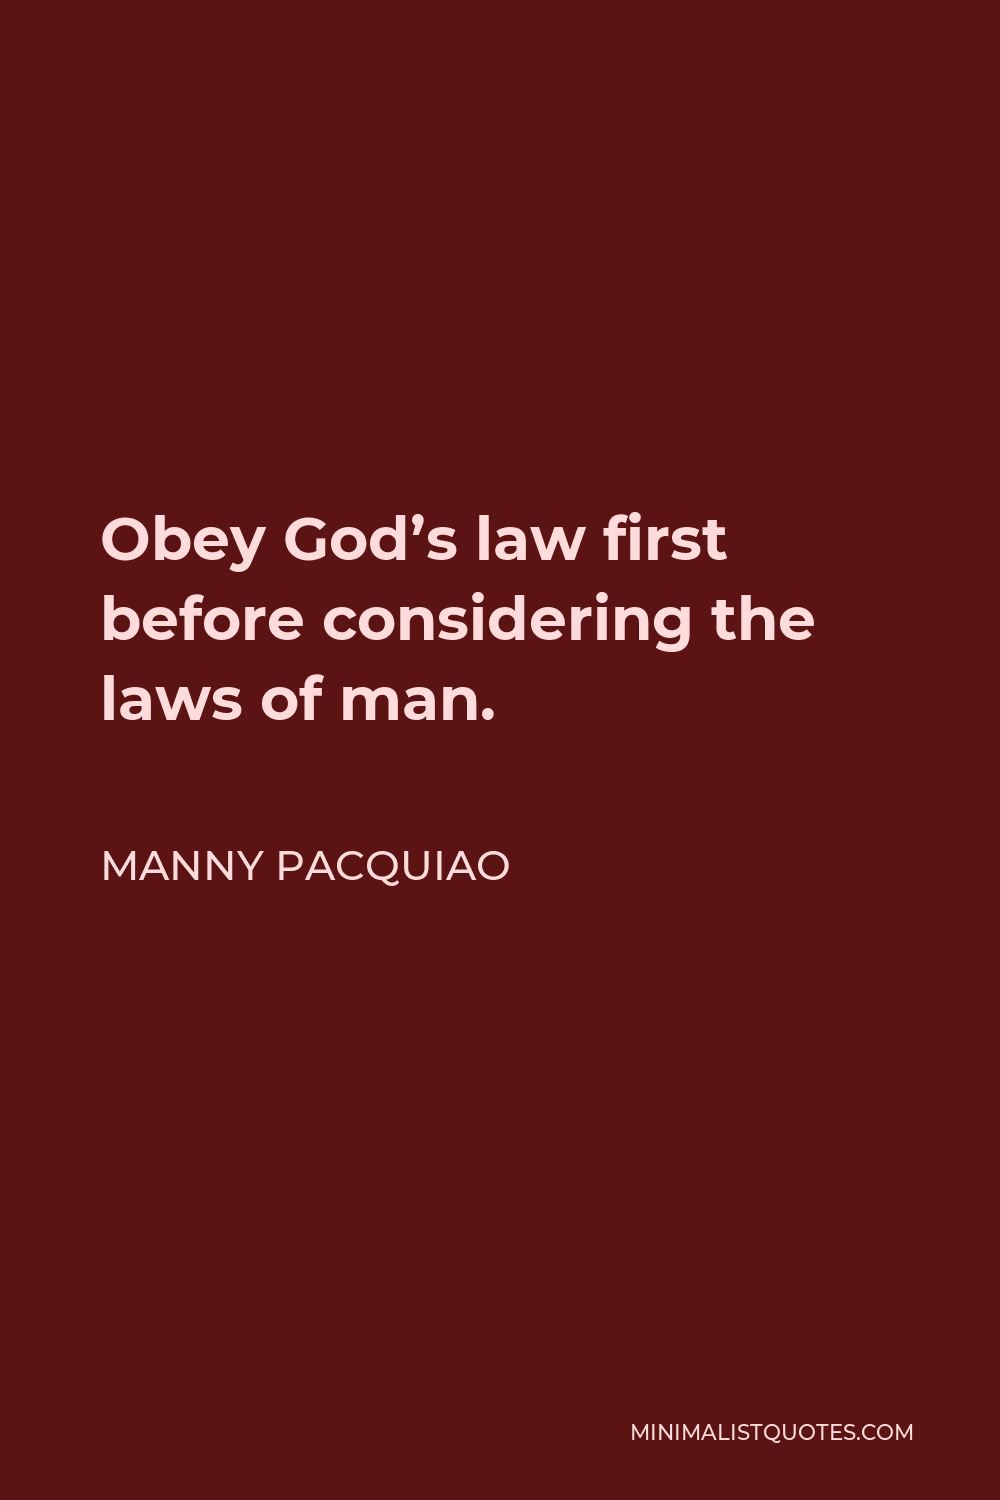 Manny Pacquiao Quote - Obey God’s law first before considering the laws of man.